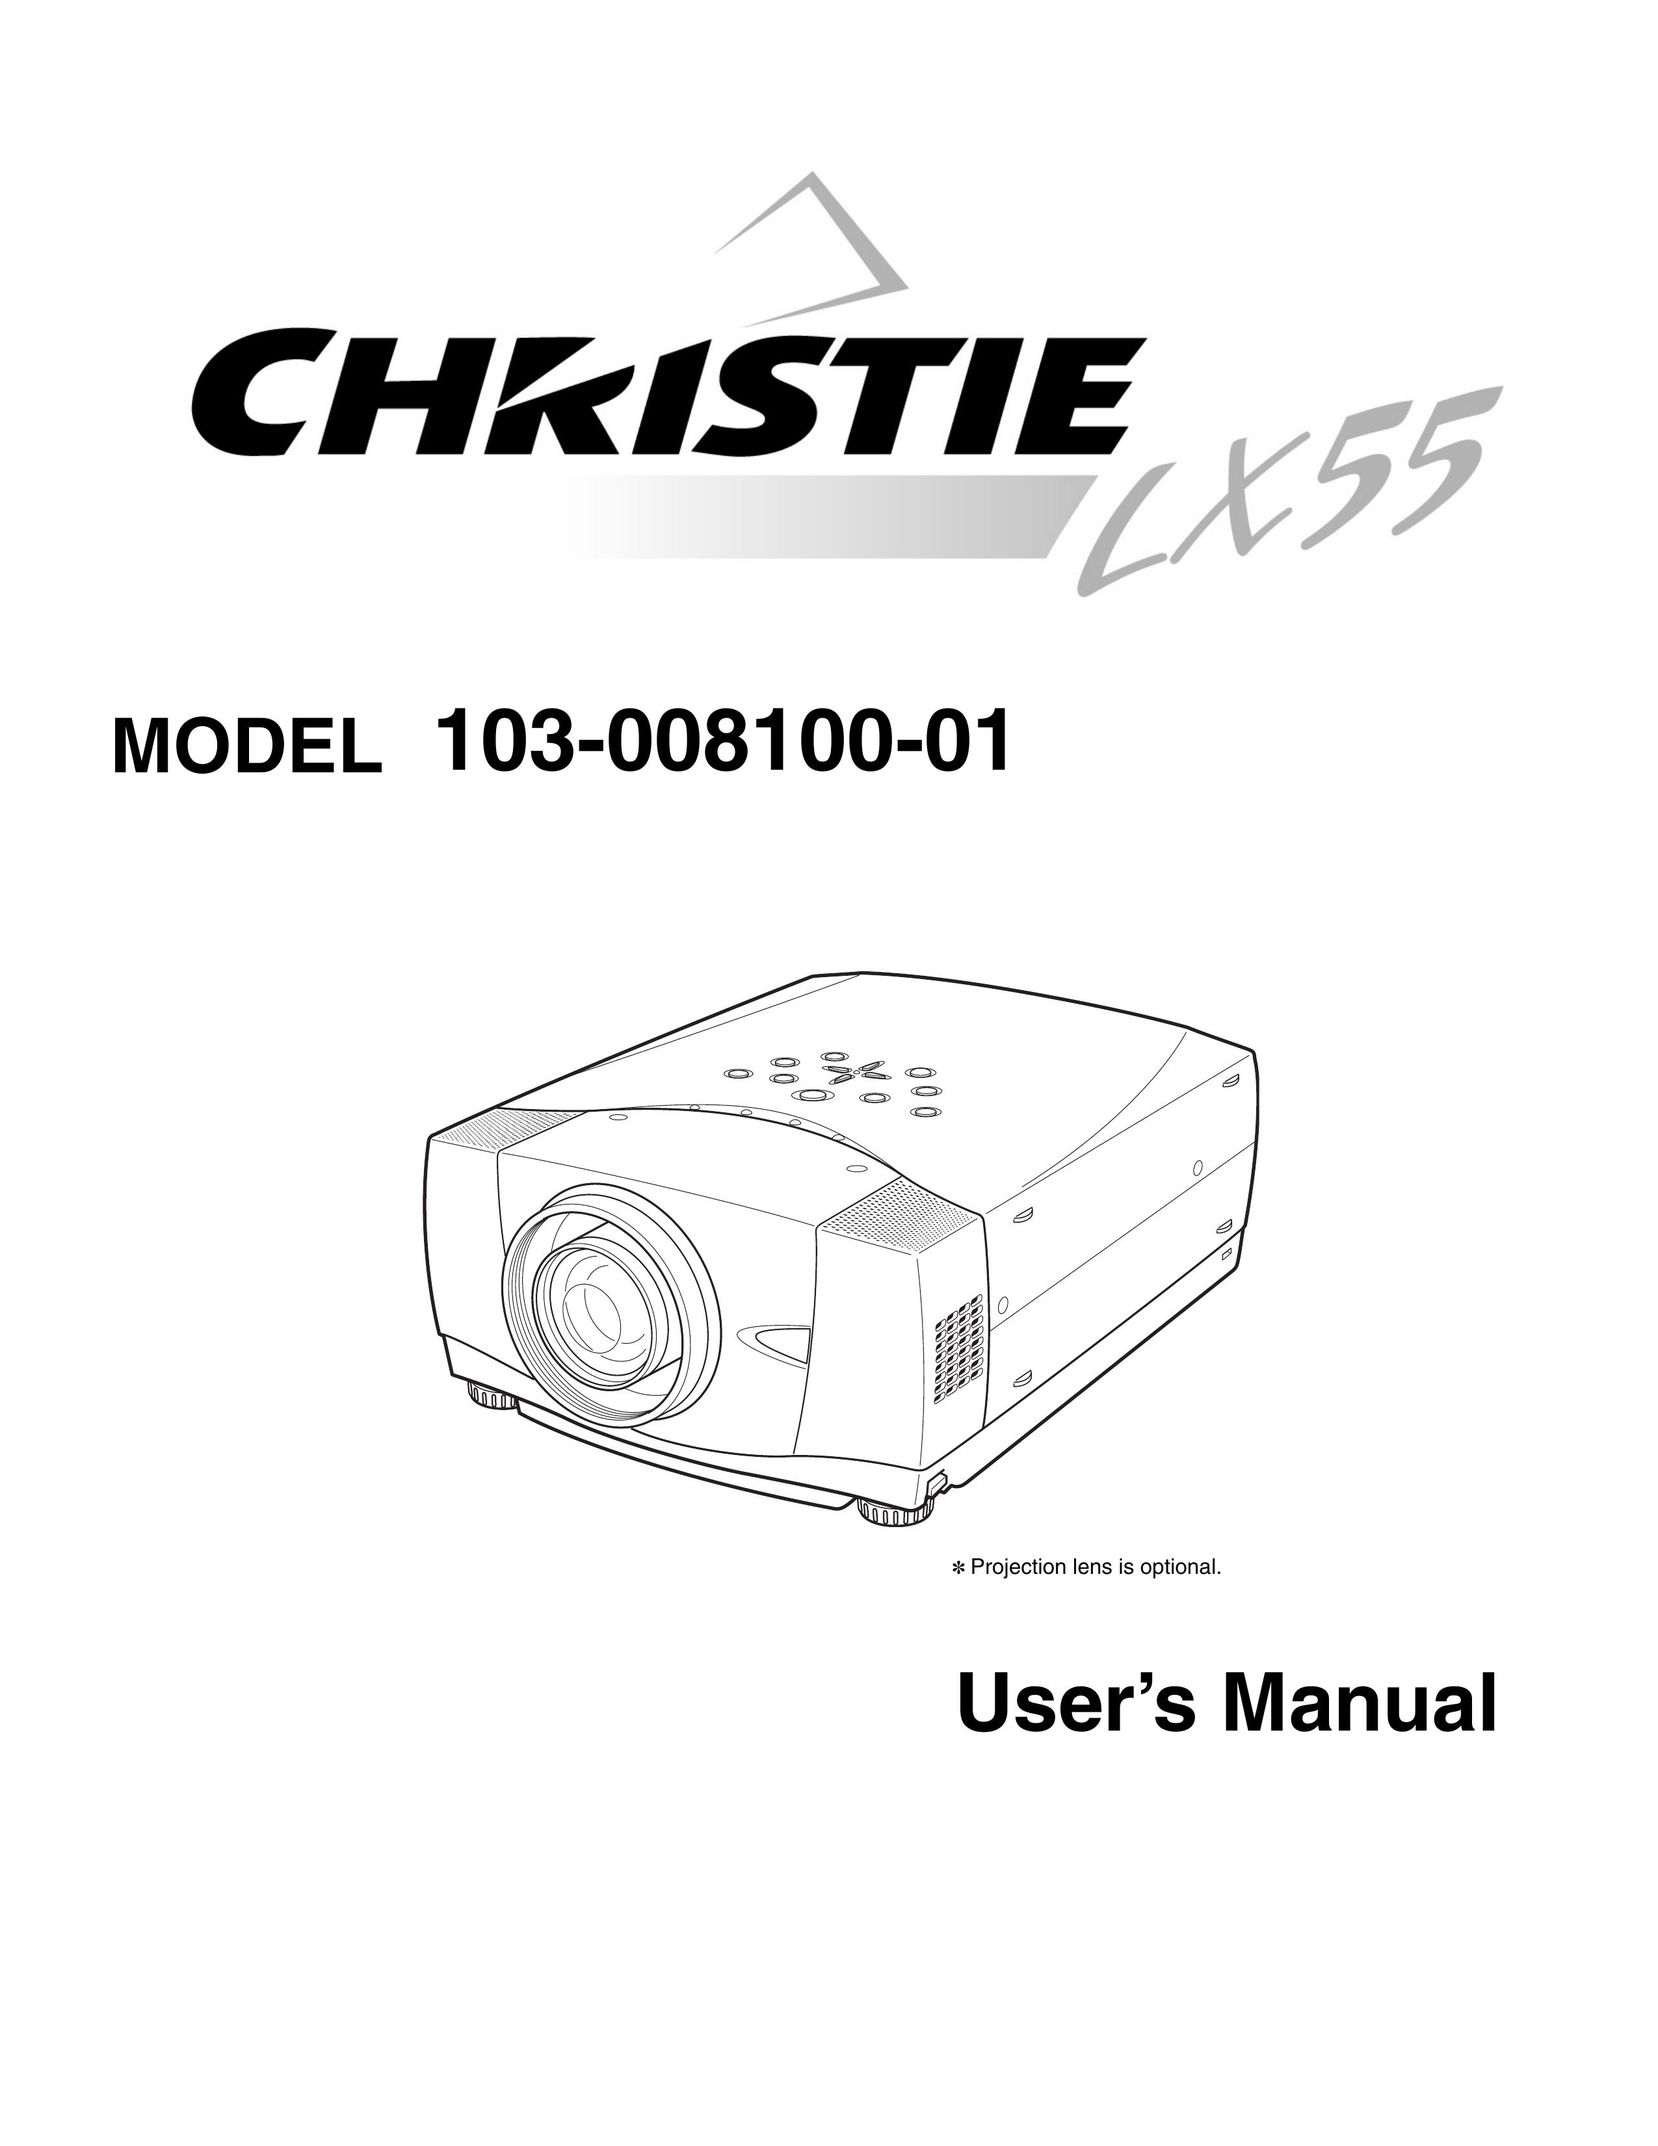 Christie Digital Systems 103-008100-01 Projector User Manual